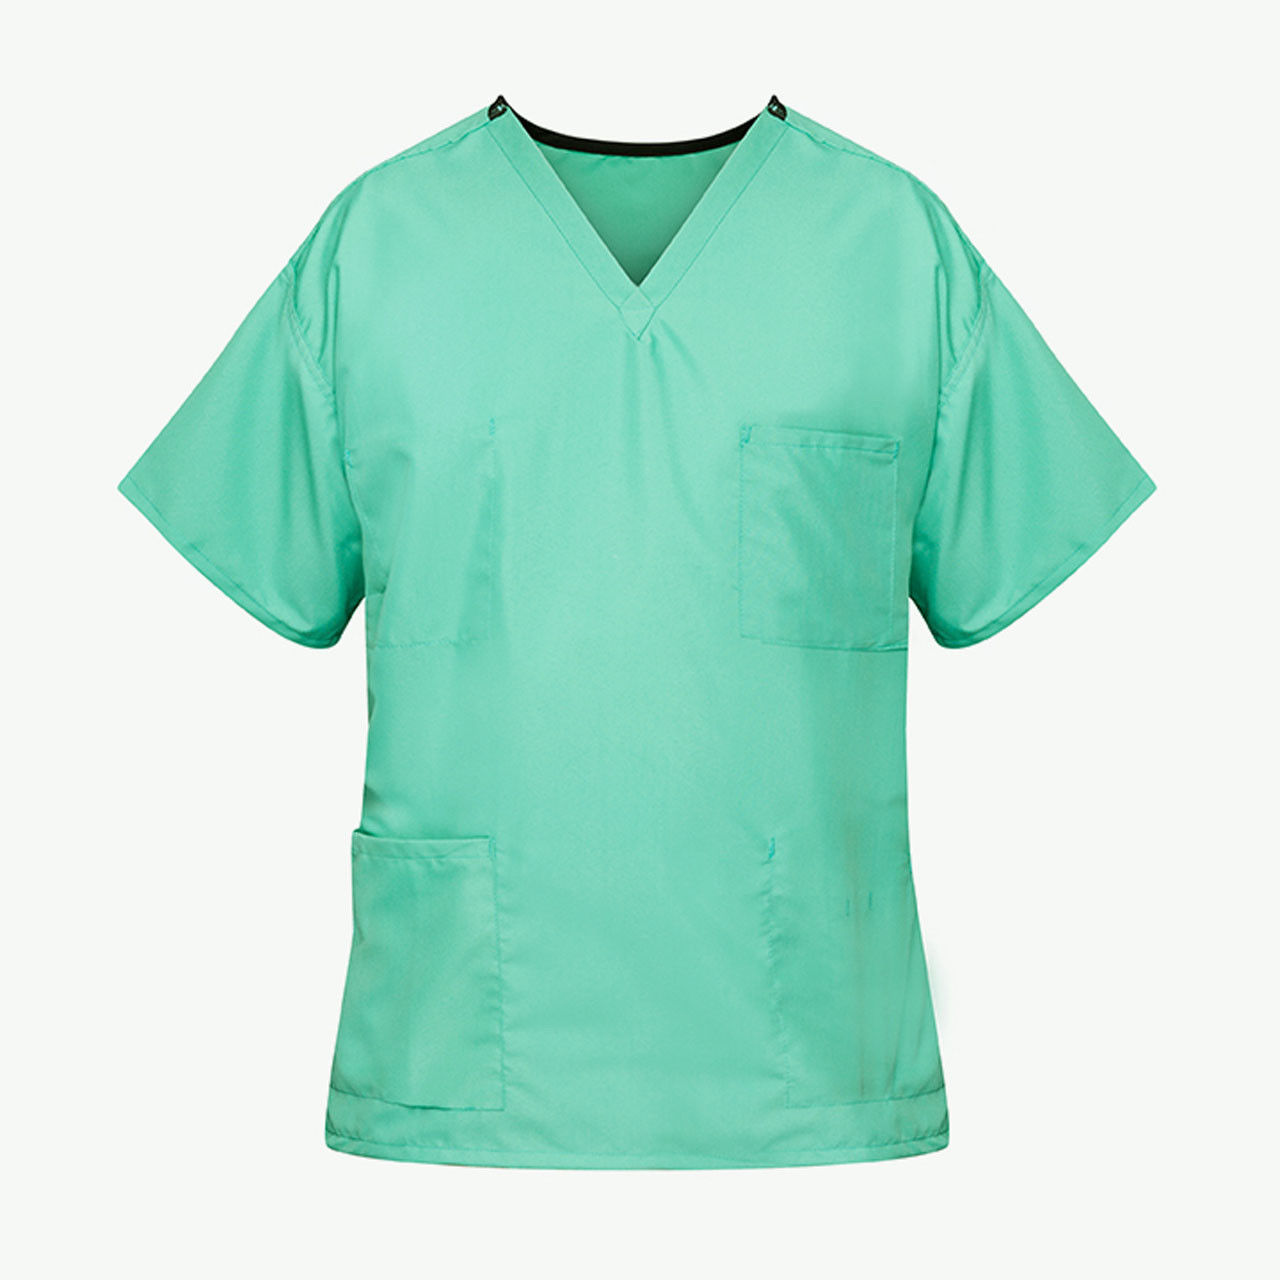 What design is featured on the V-Neck of these jade green scrubs in bulk?